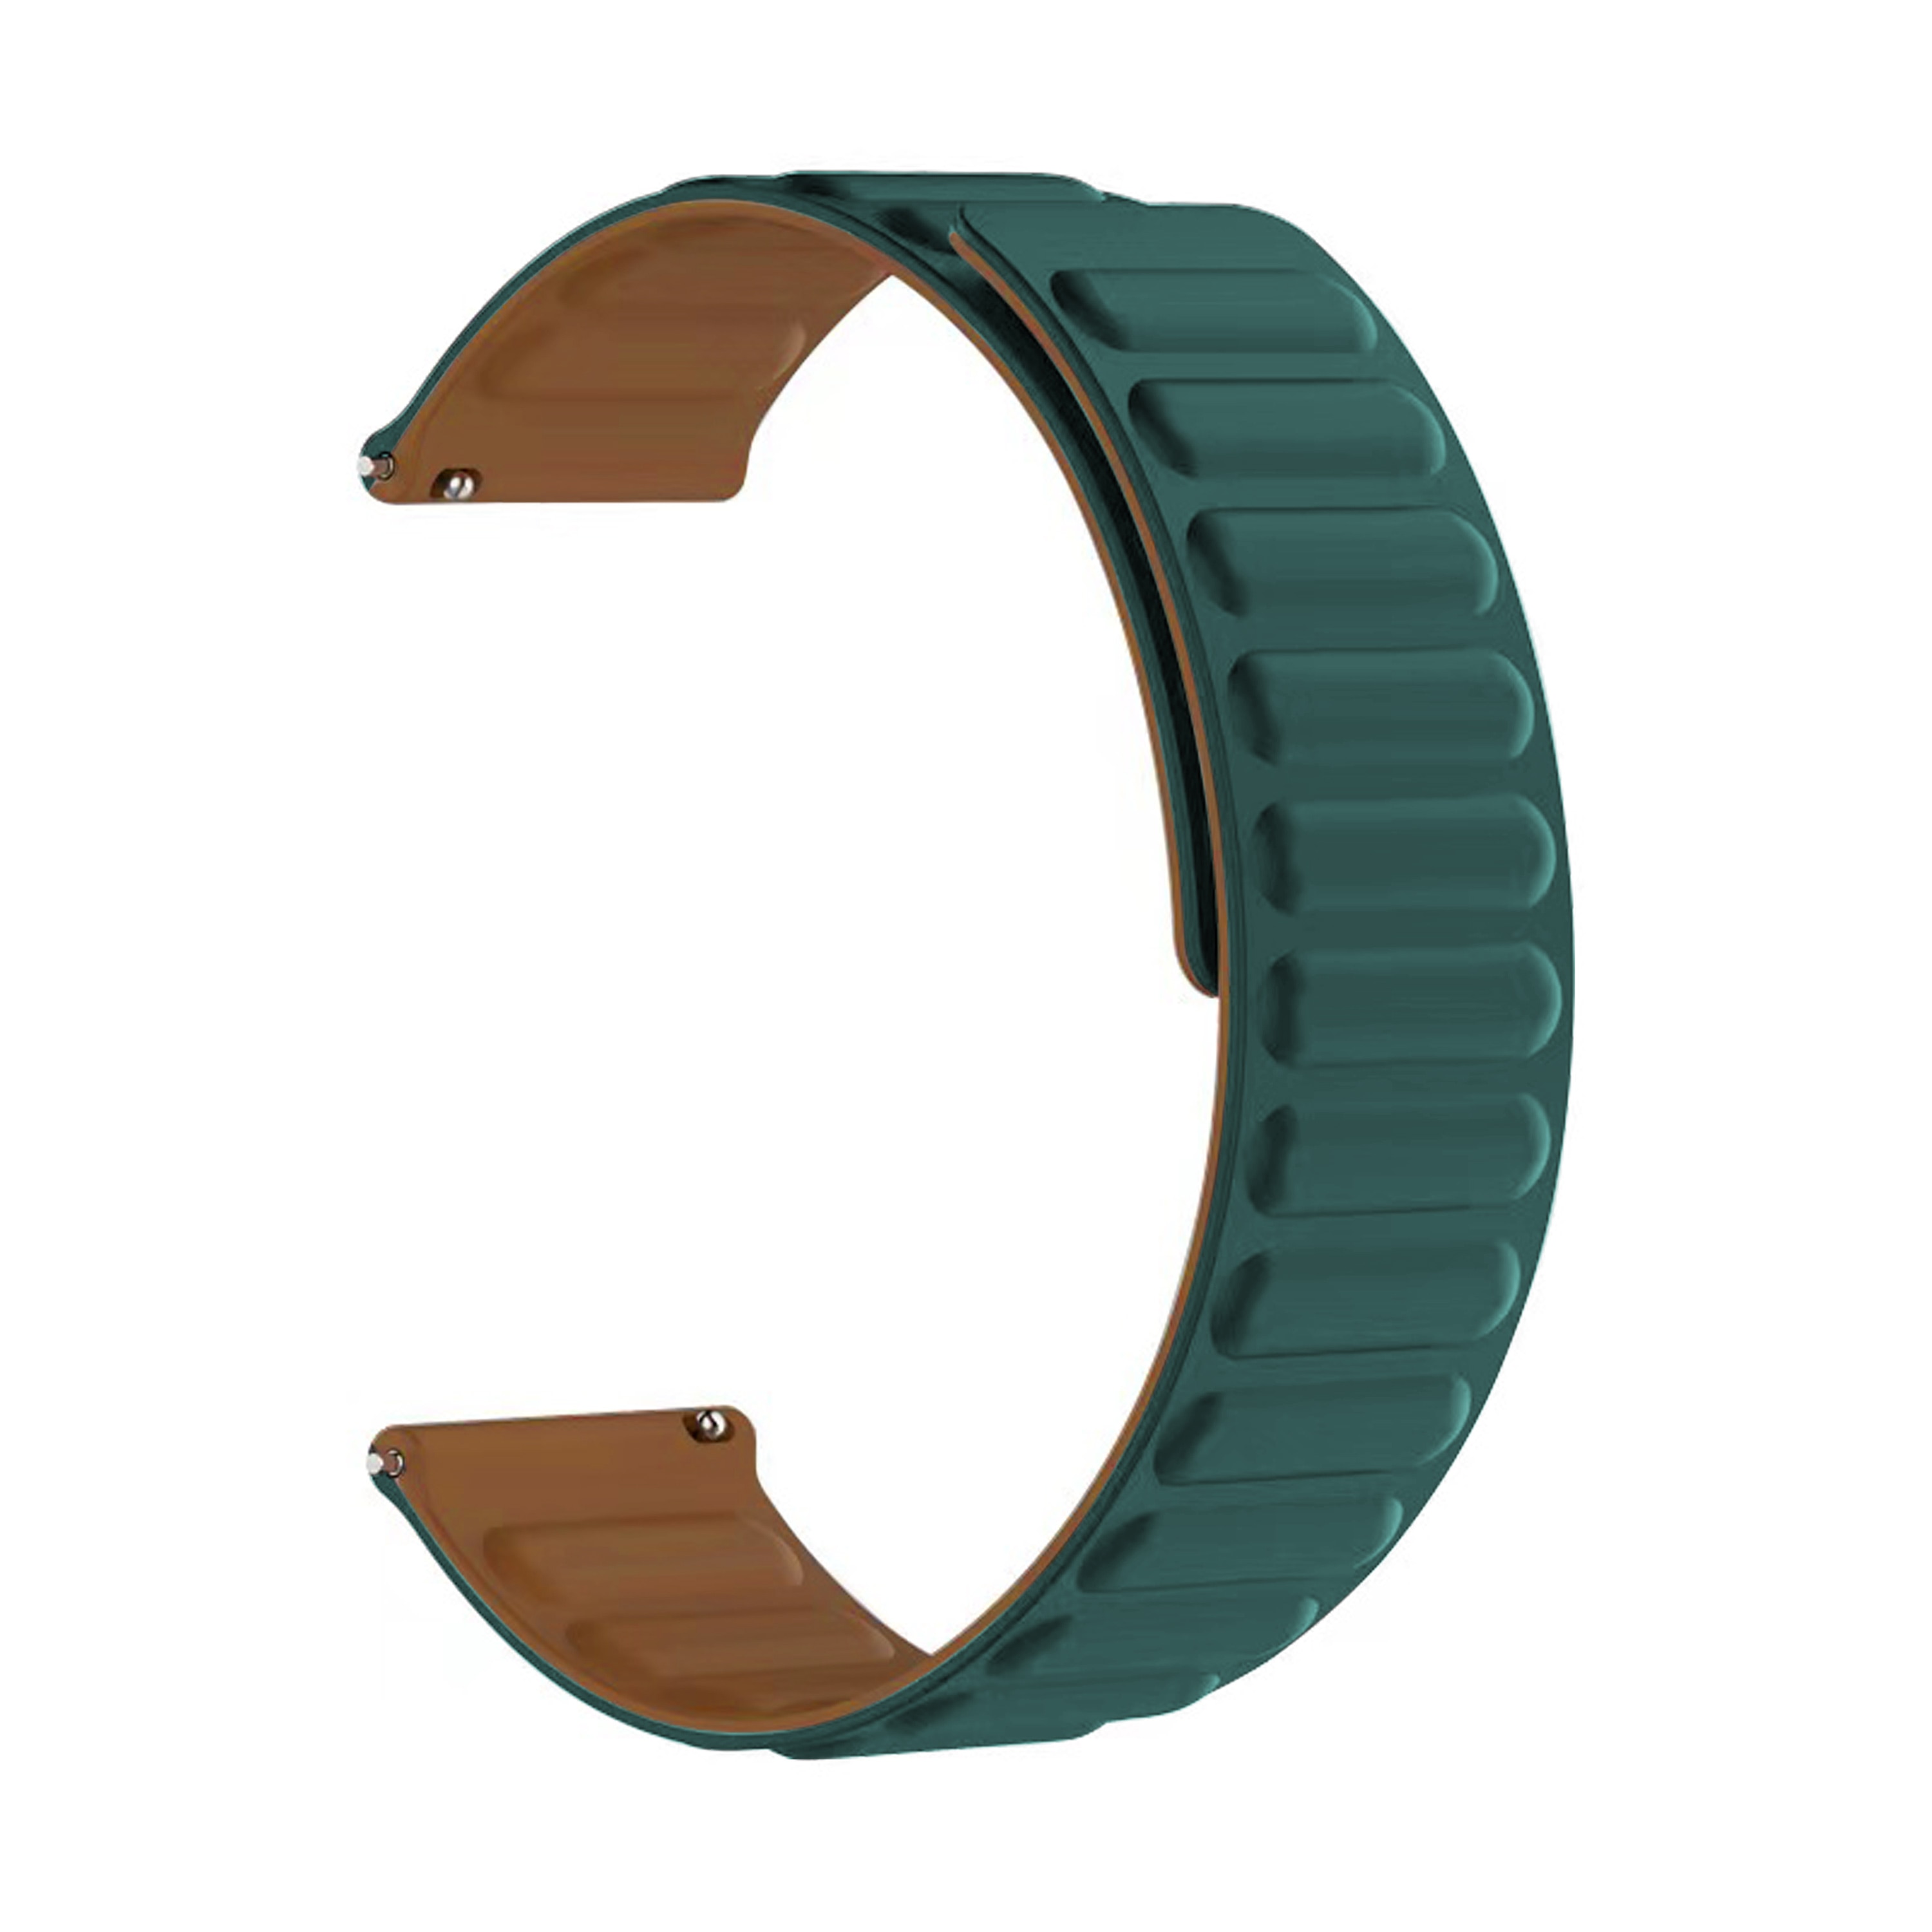 Hama Fit Watch 5910 Magnetic Silicone Band Green